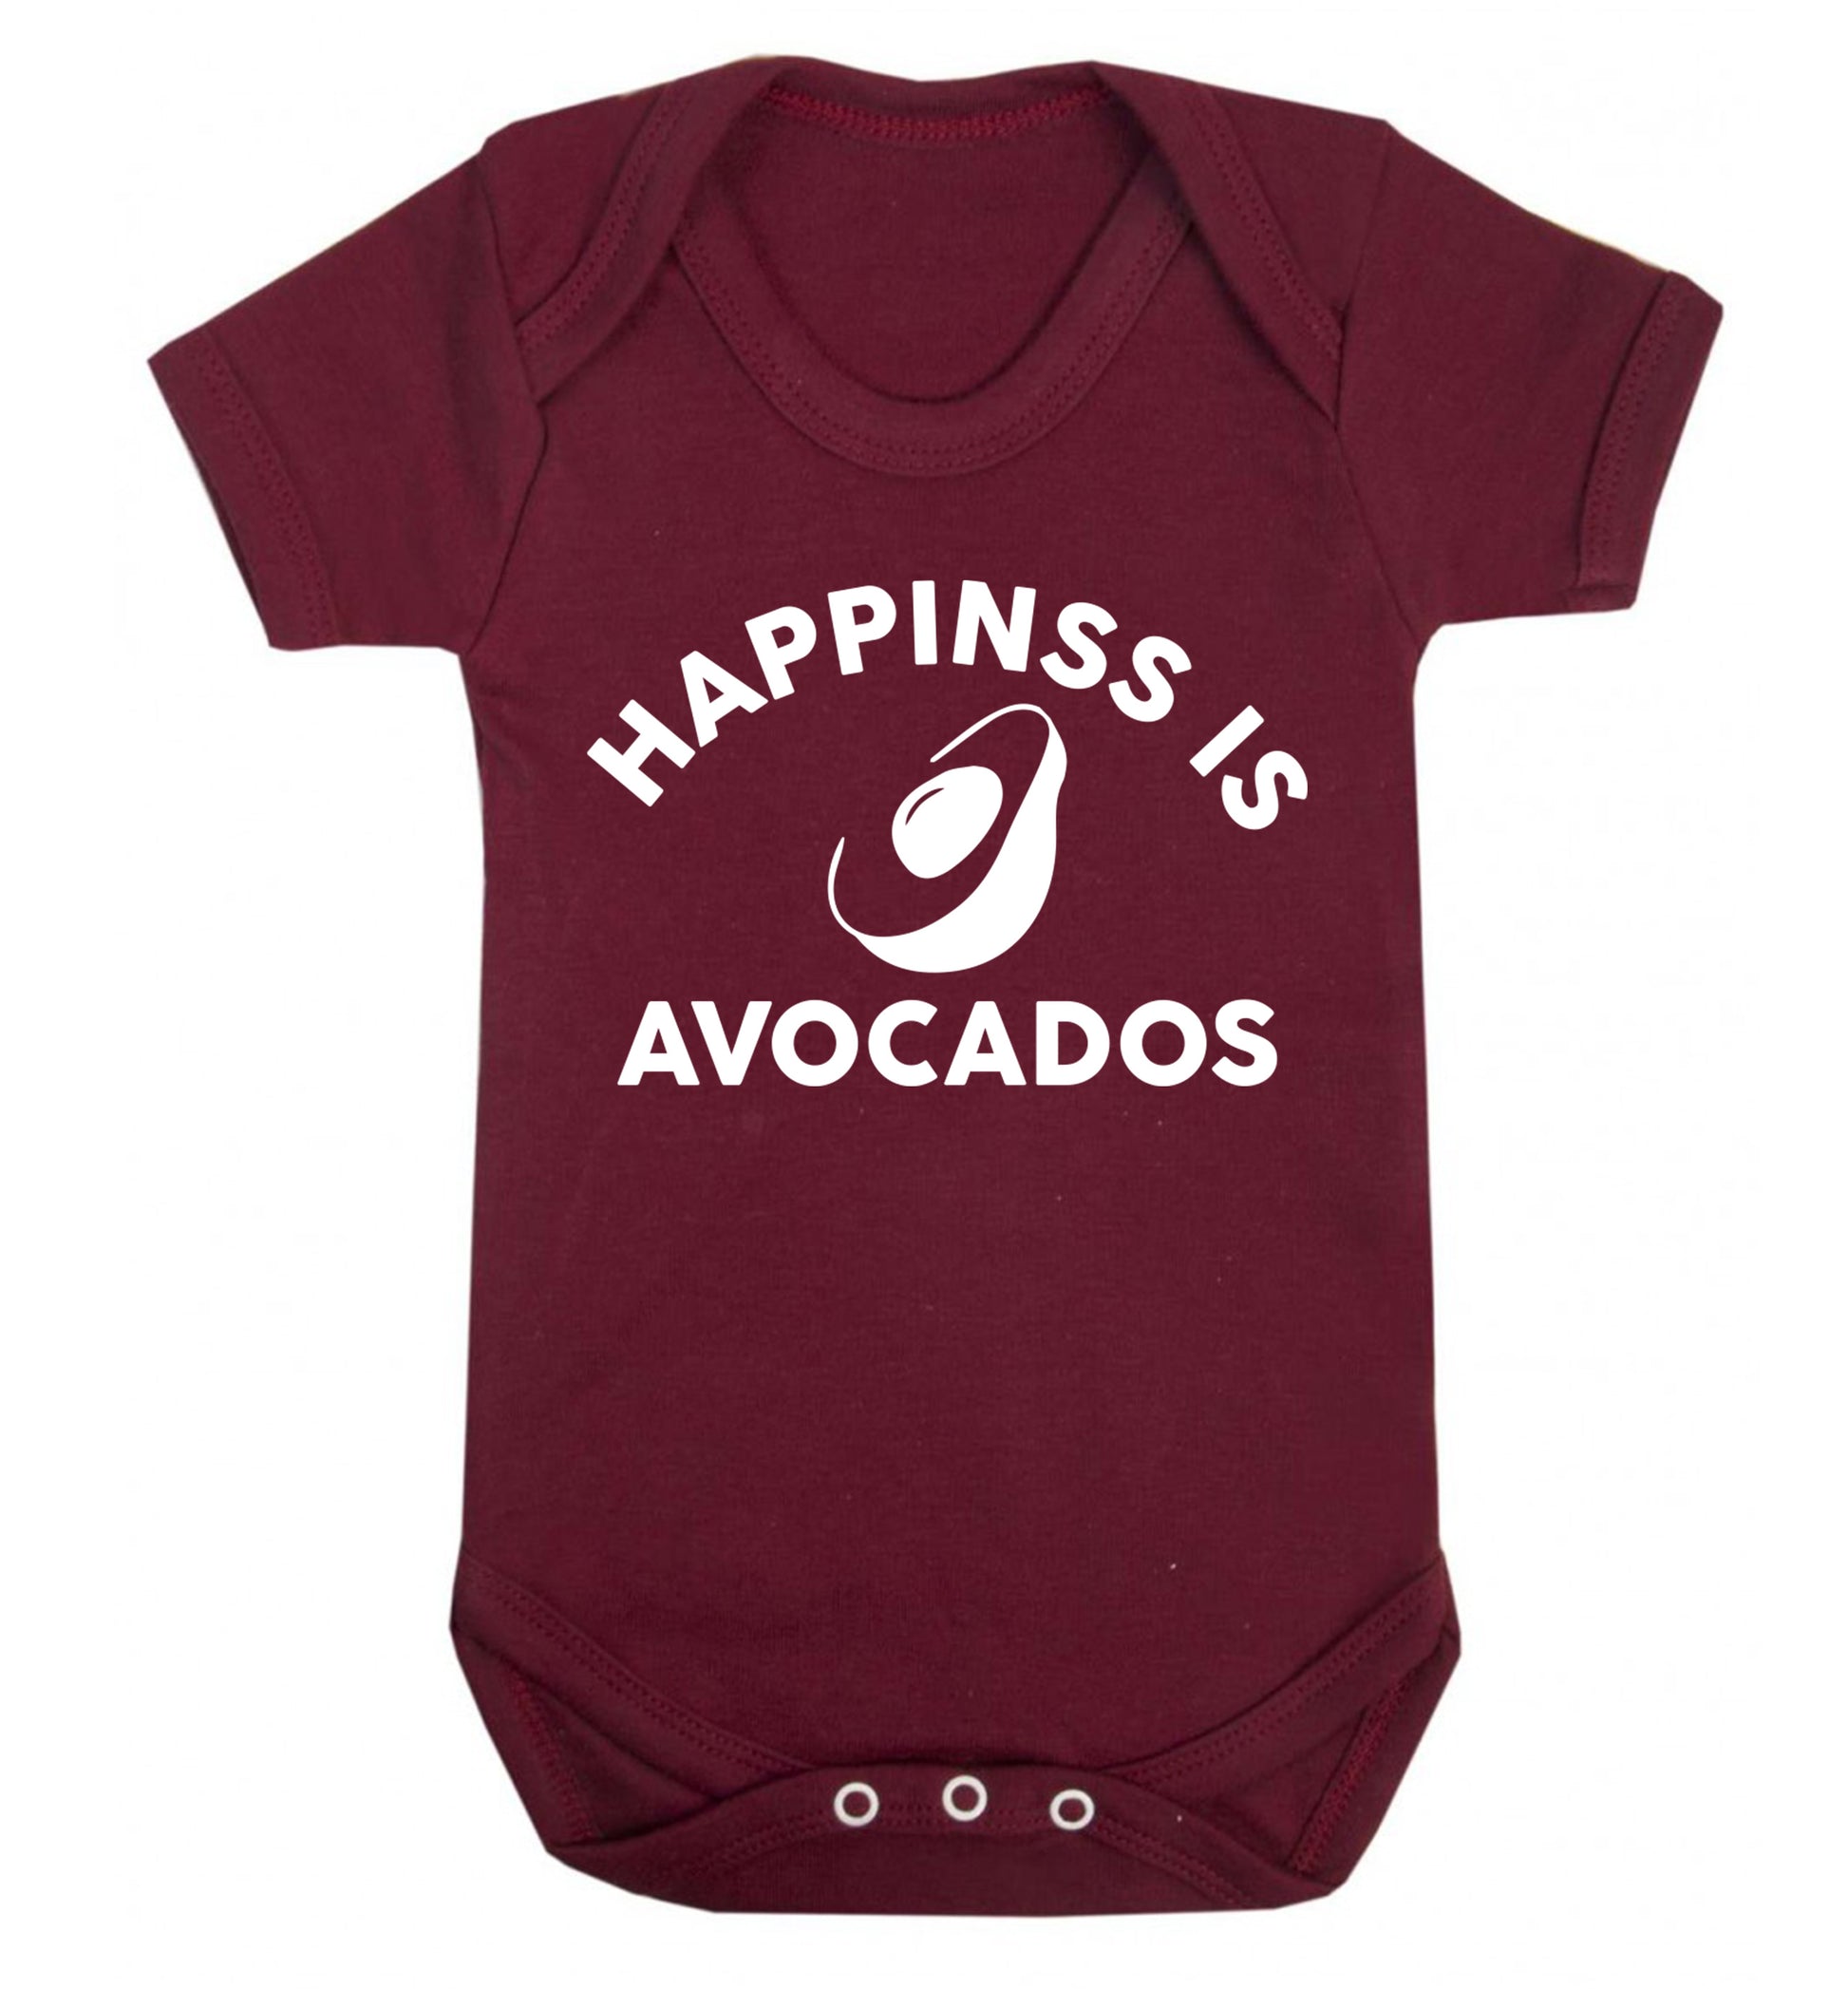 Happiness is avocados Baby Vest maroon 18-24 months